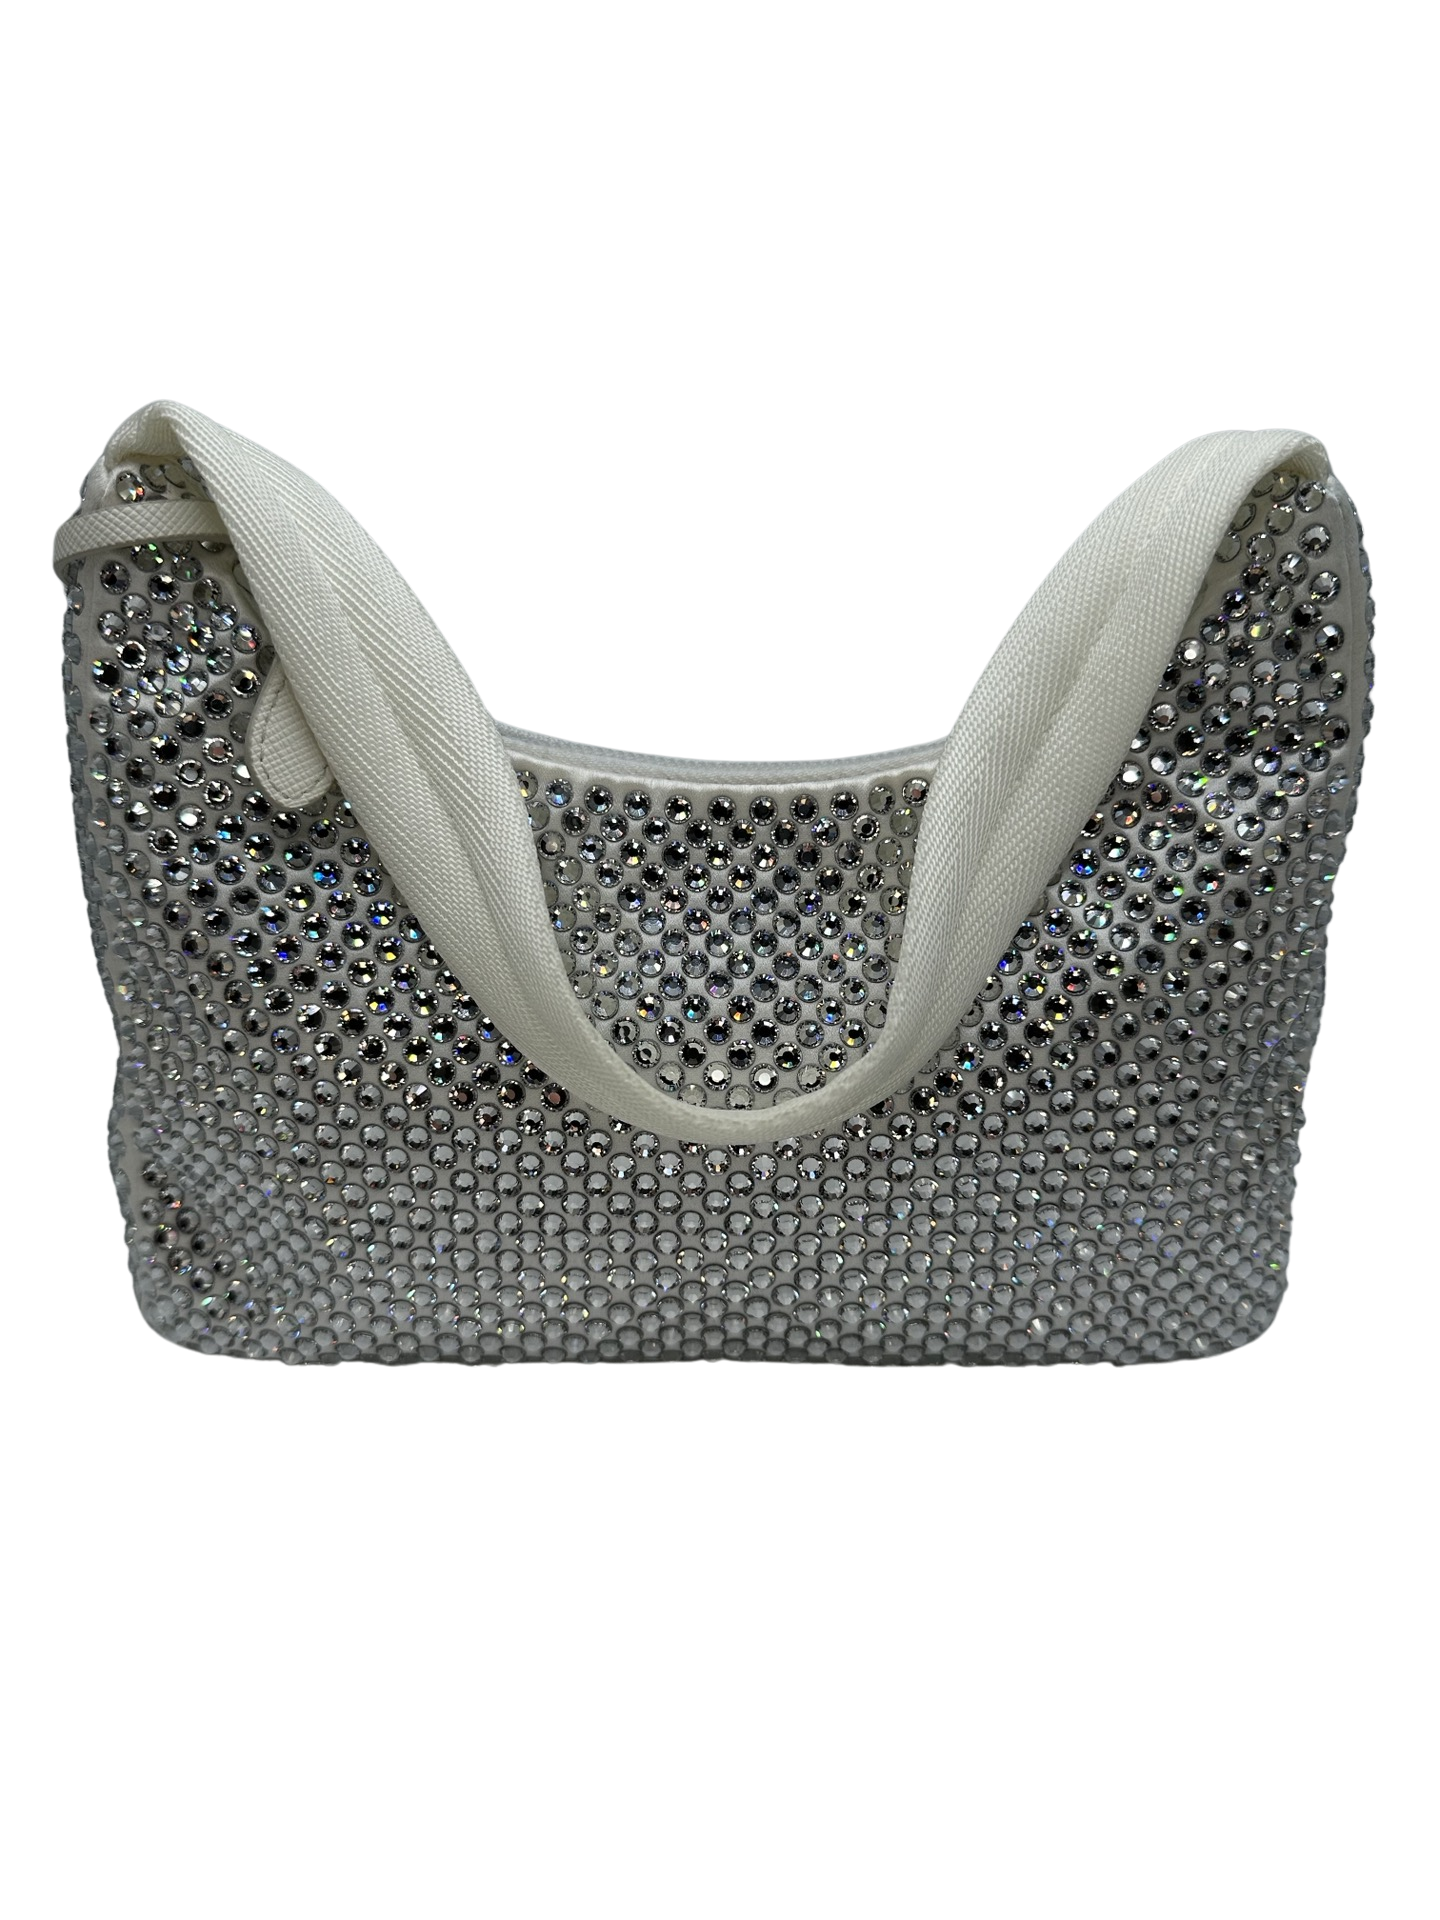 Pictured: The back of the Prada Crystal satin mini bag re-edition in white covered with crystals. No imperfections.